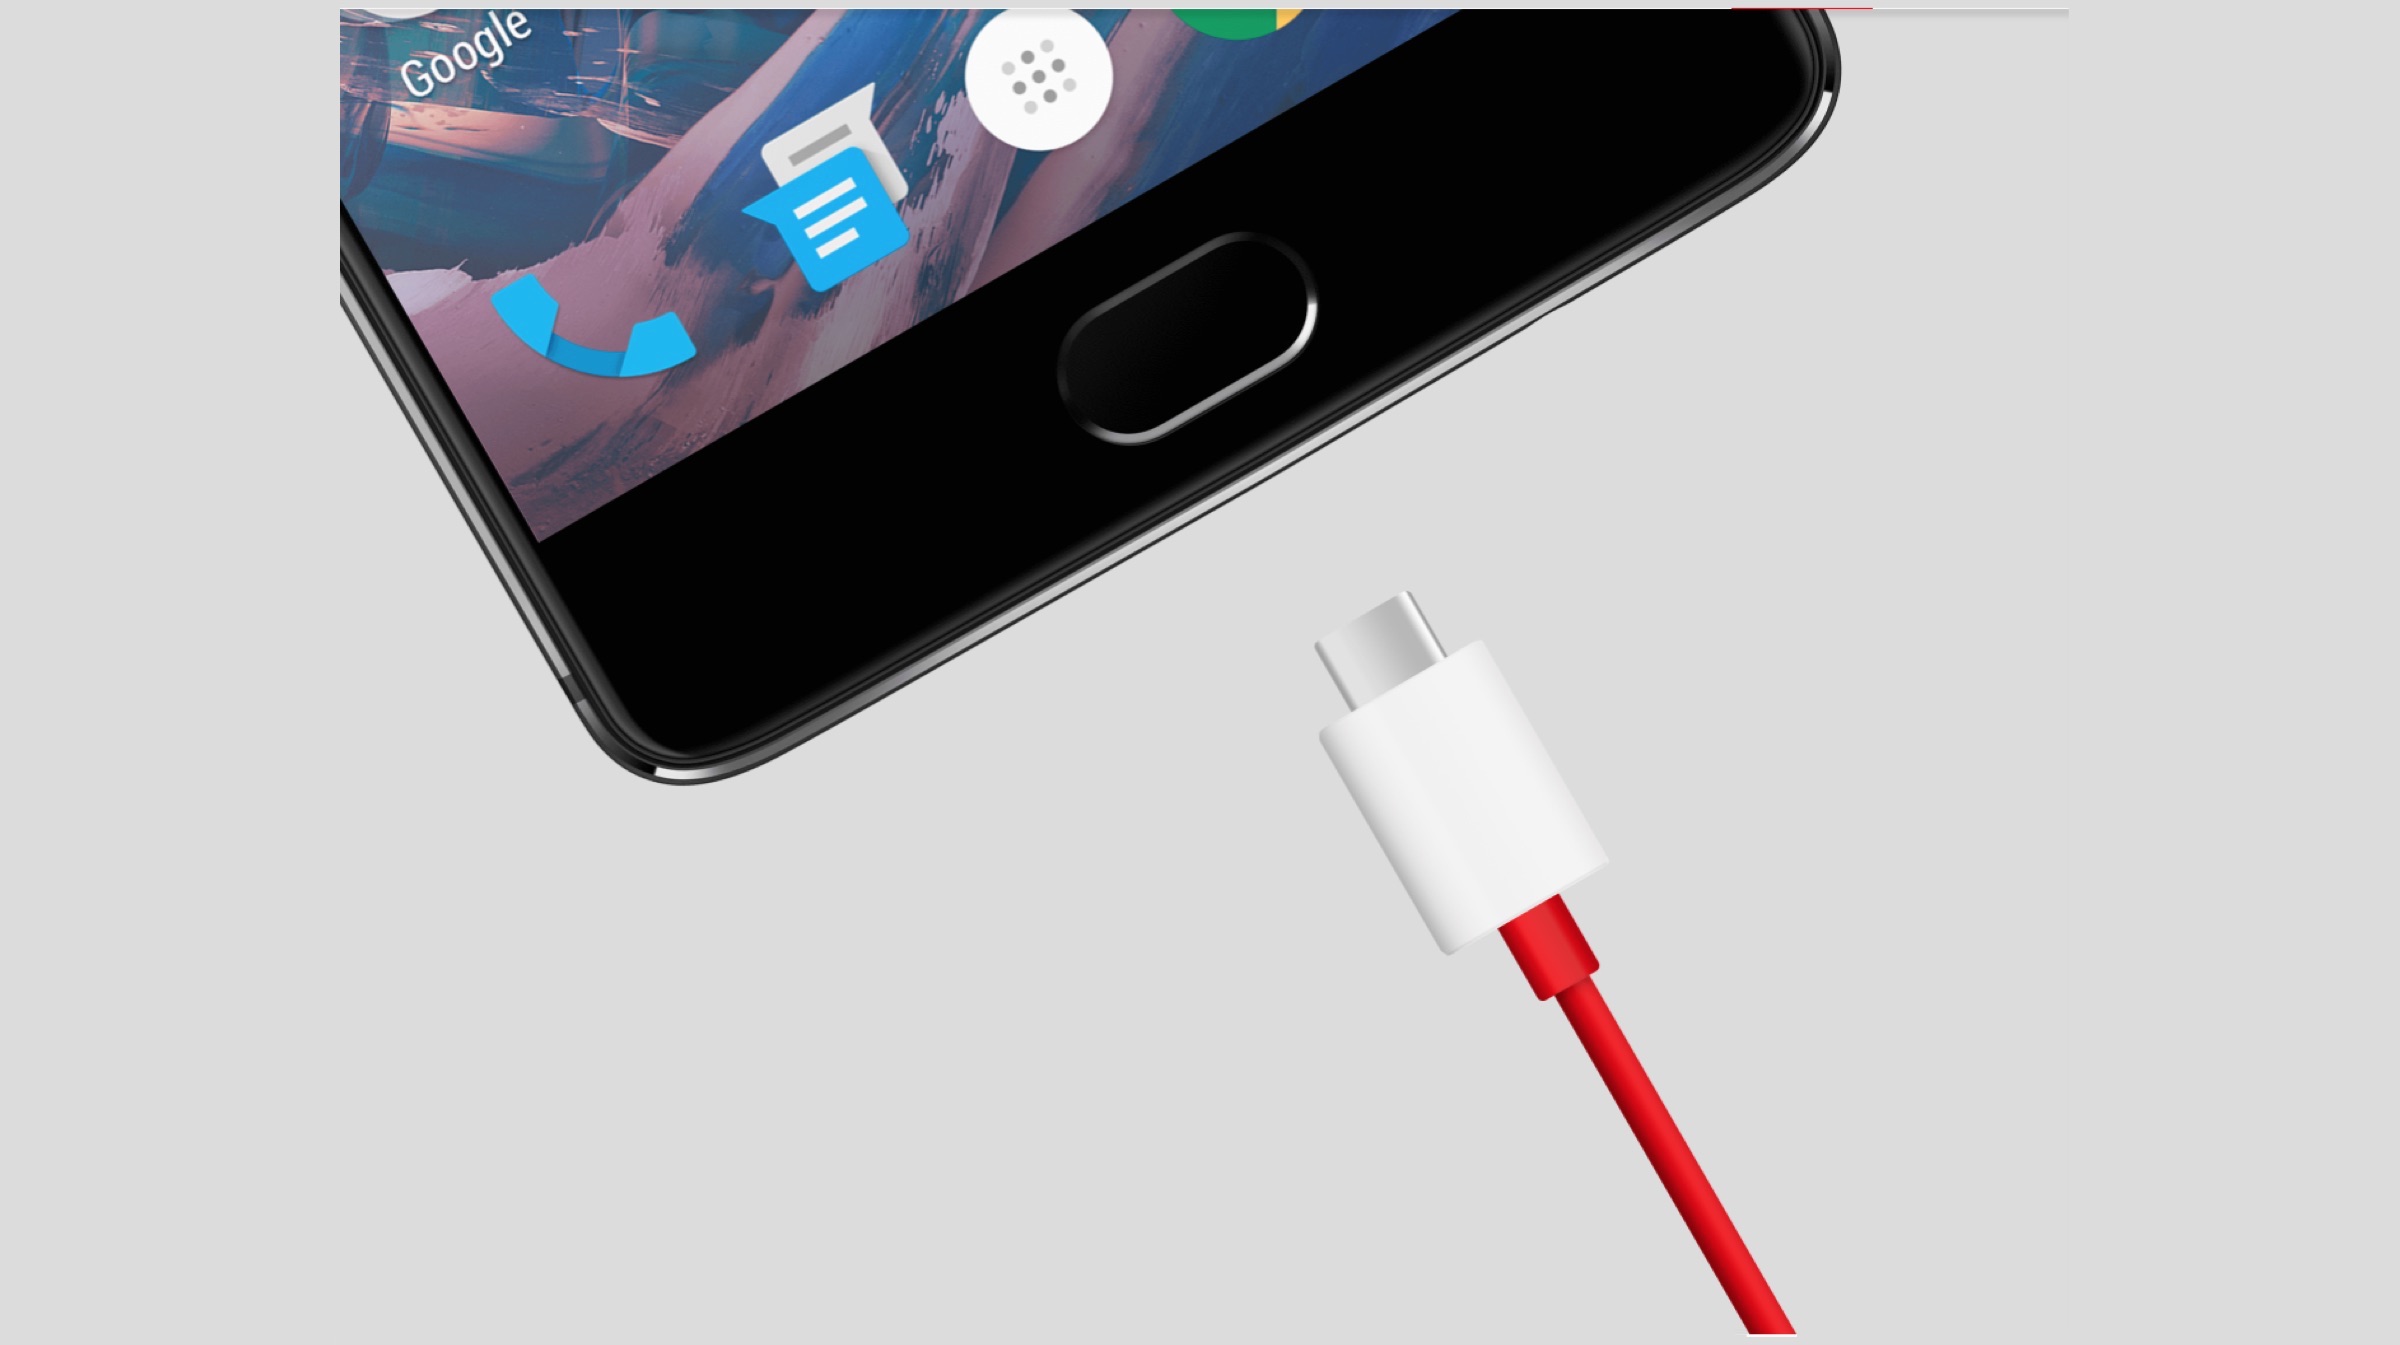 Does the oneplus 6 have wireless charging